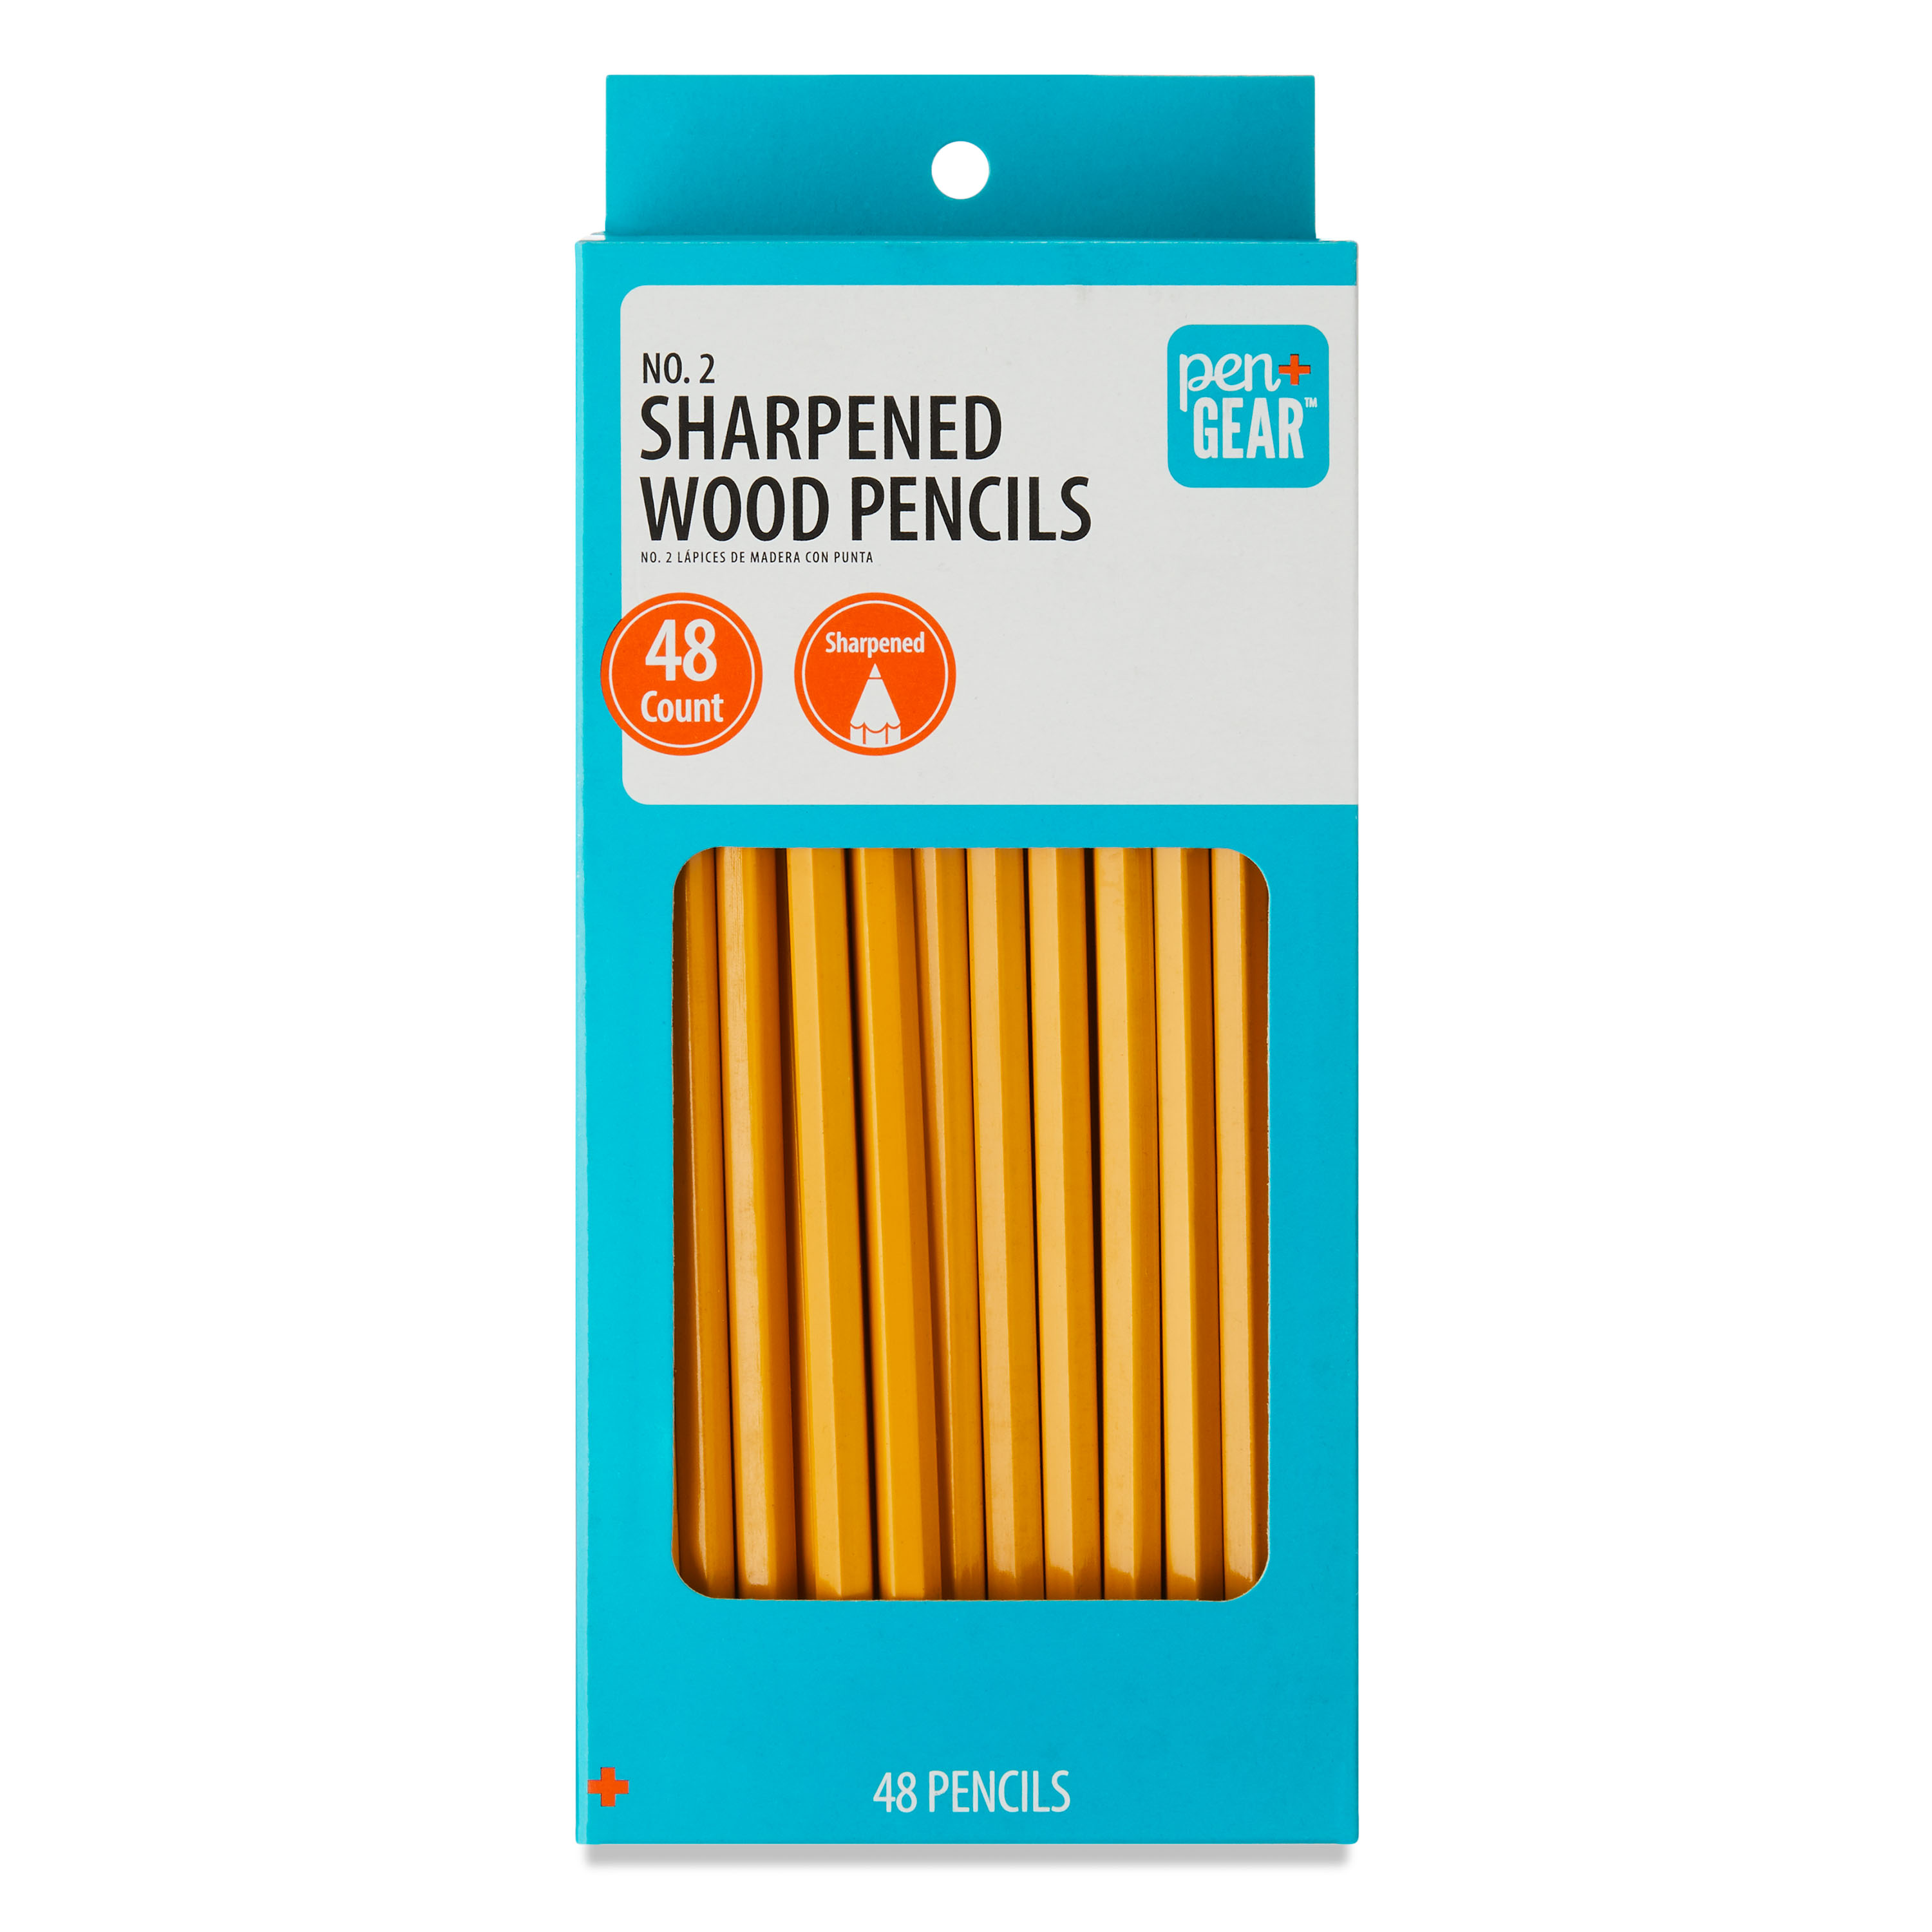 Pen+Gear No. 2 Wood Pencils, Sharpened, 48 Count - image 1 of 10